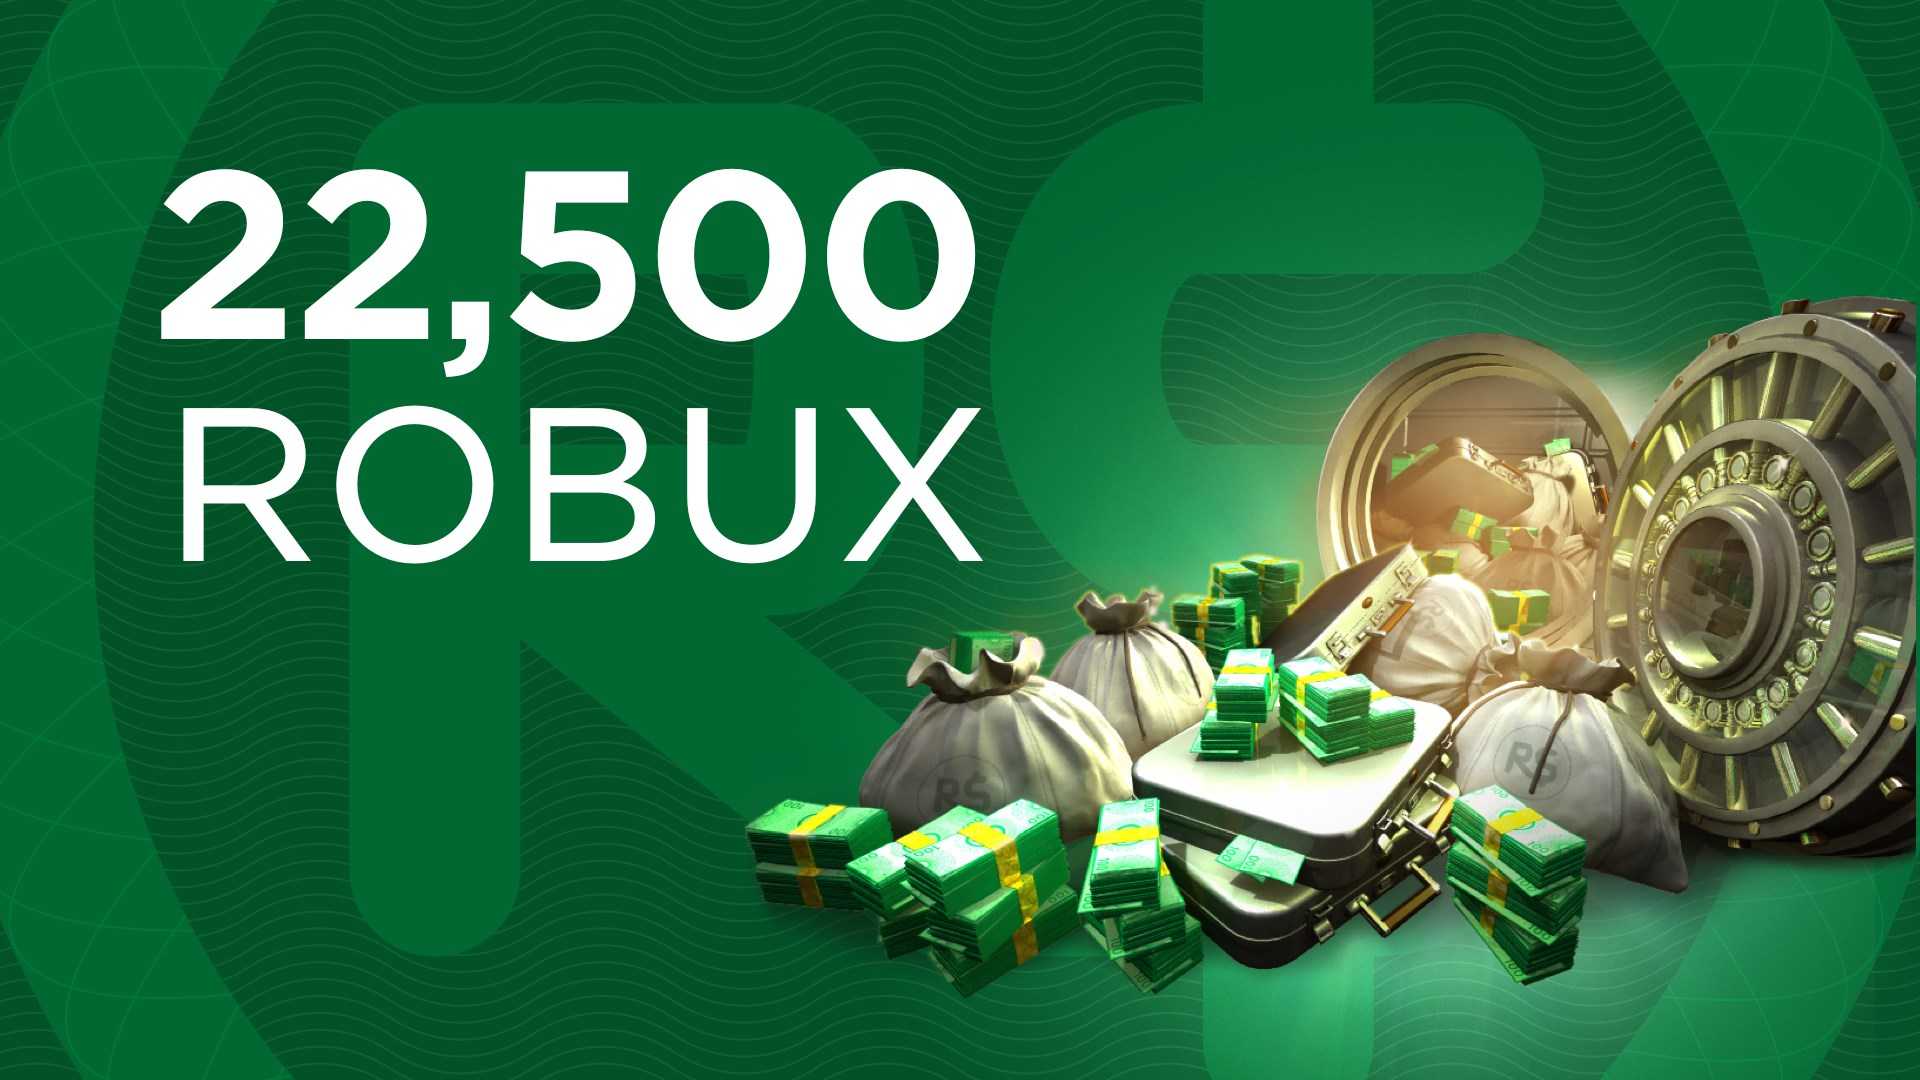 7. 400 Robux Code Hack - Get Unlimited Free Robux - wide 6